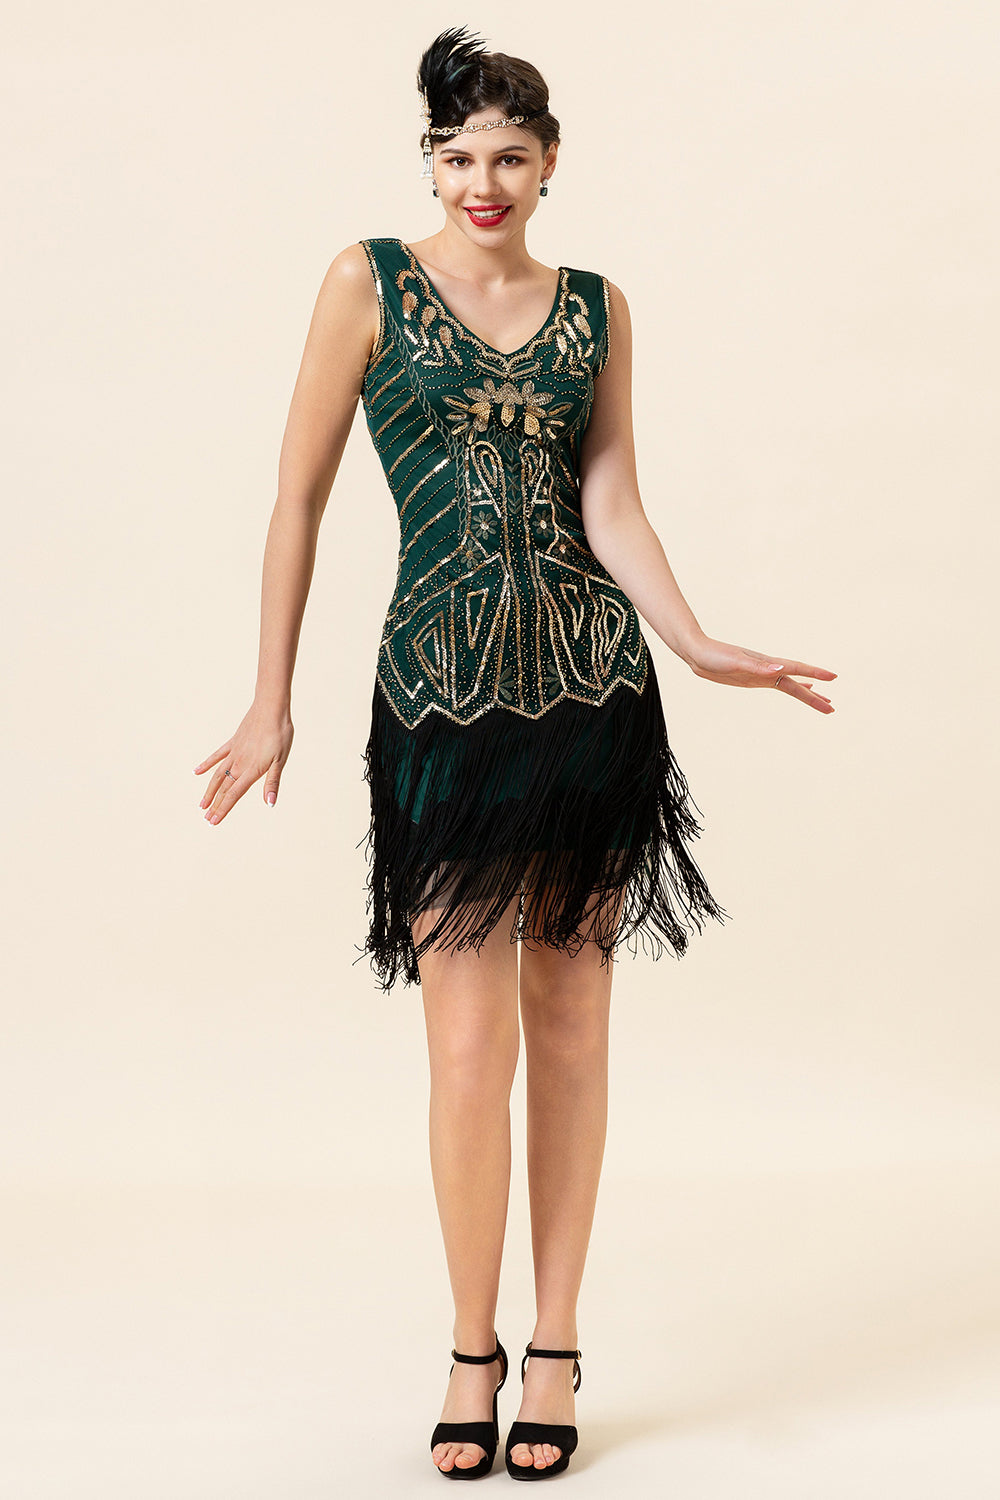 V Neck Green Sequins 1920s Great Gatsby Dress with Tassel